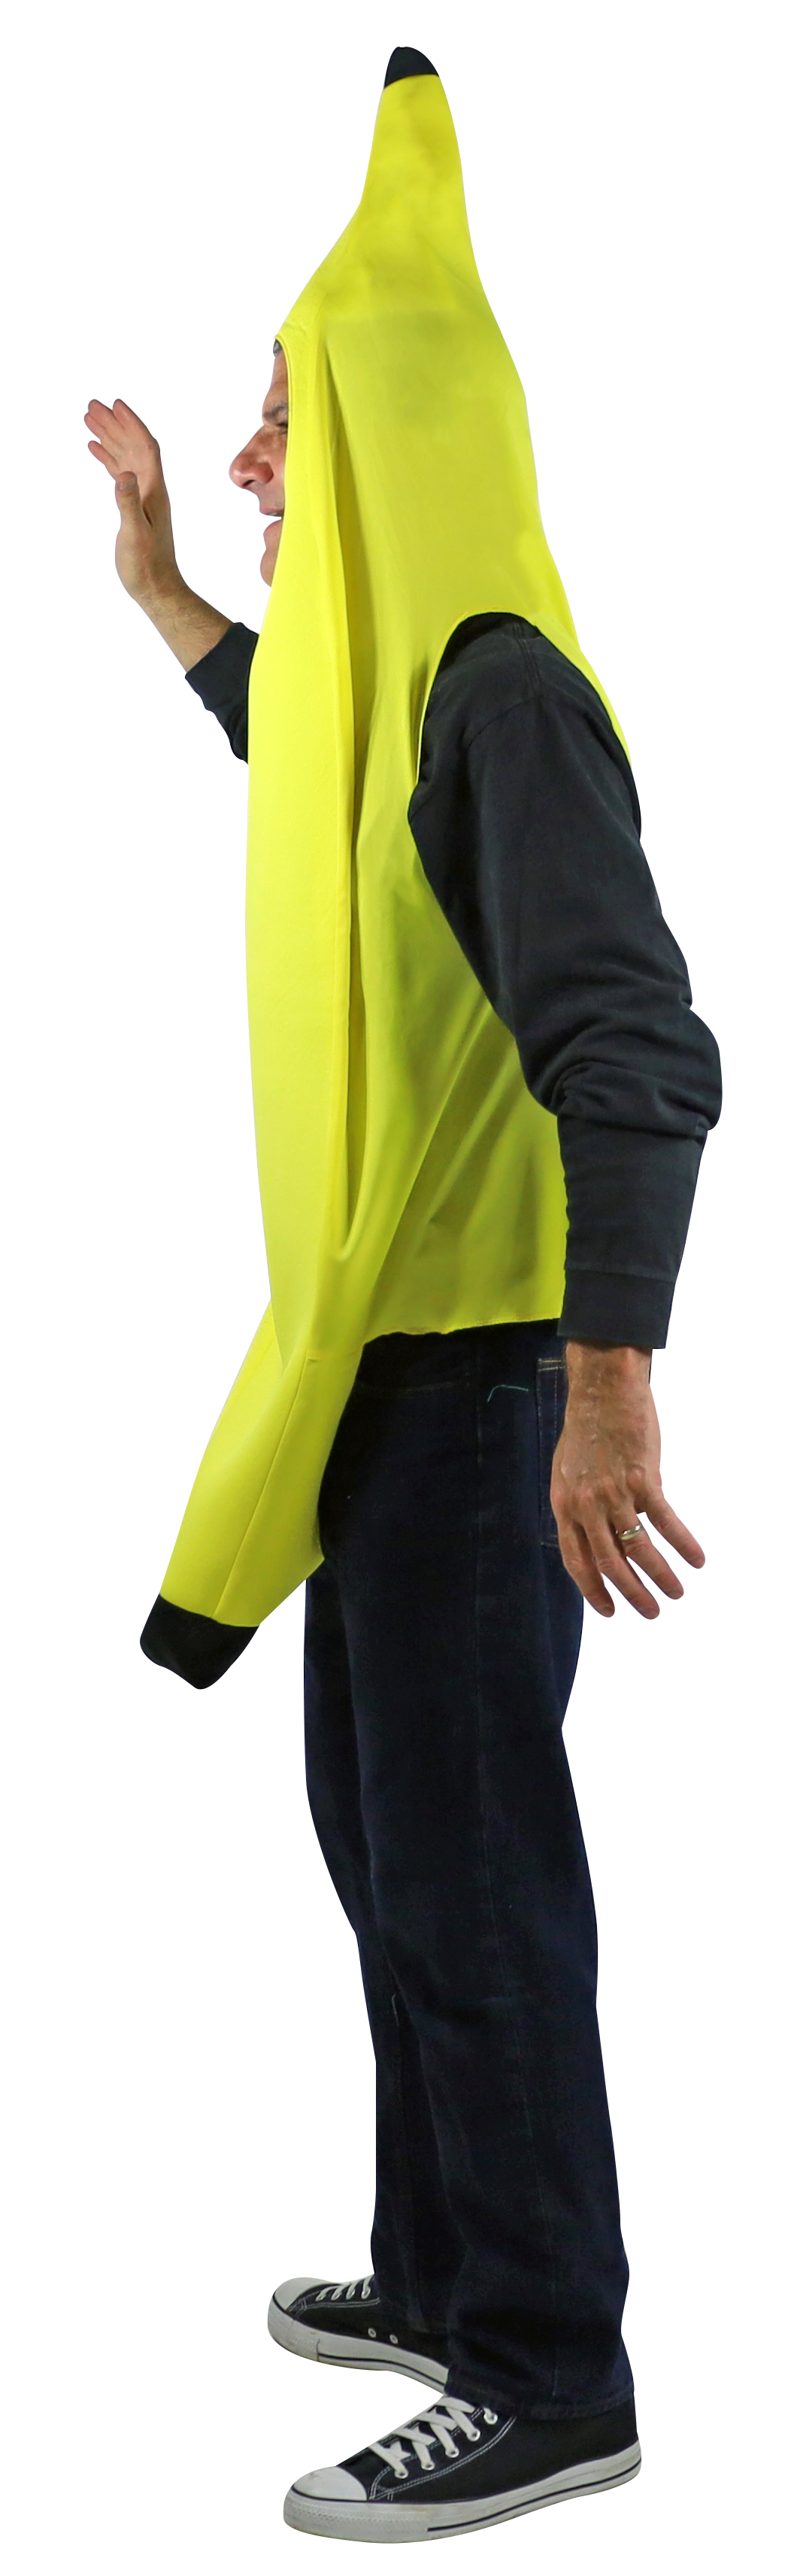 Banana Tunic Halloween Costume for Adults, Mens One Size Fit , by Rasta Imposta - image 2 of 5